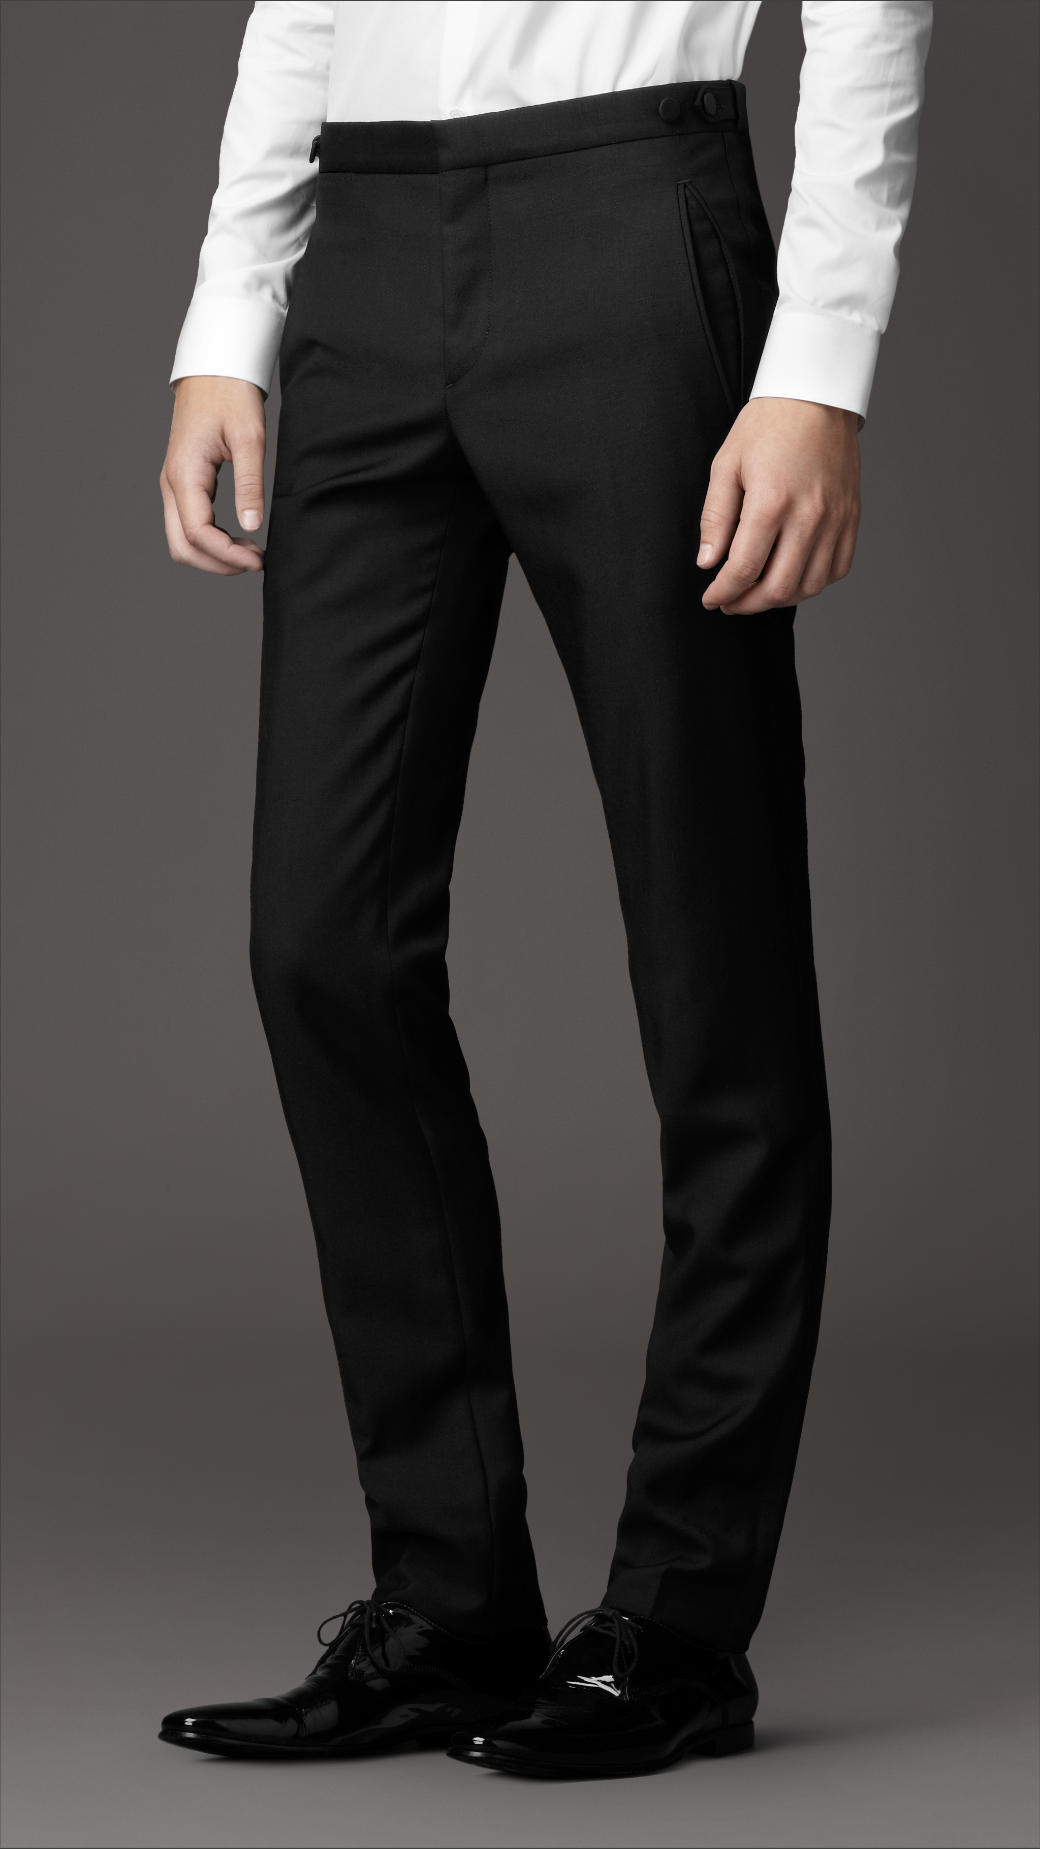 Top 78+ black evening trousers latest - in.coedo.com.vn